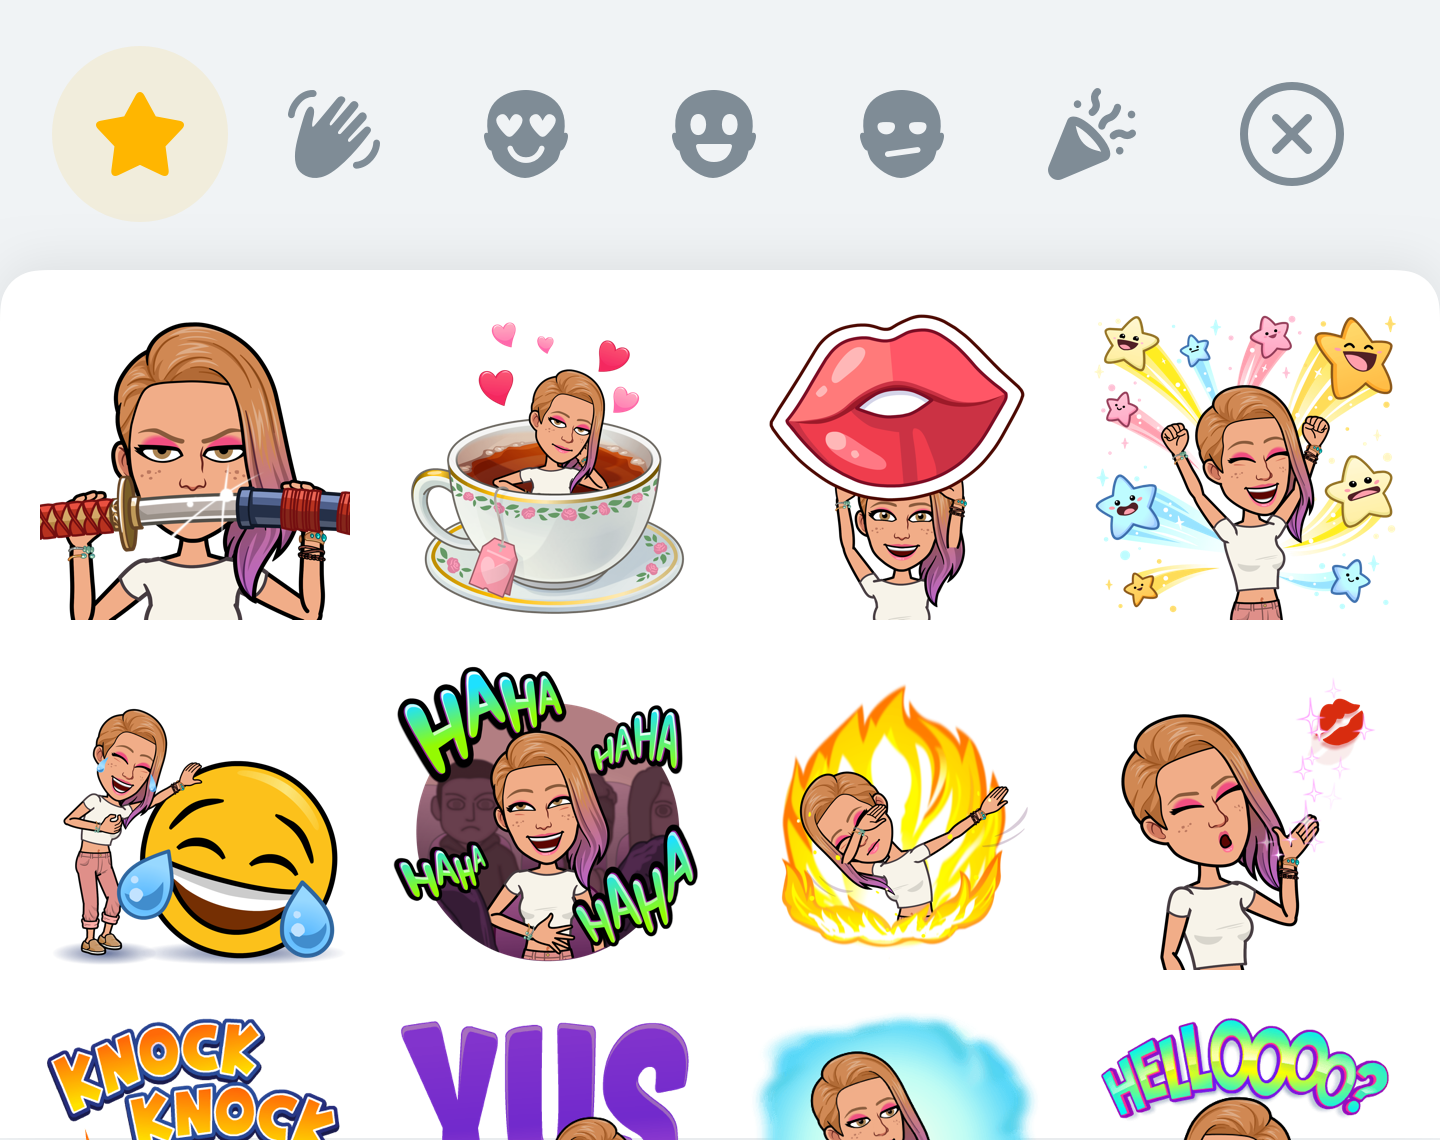 Bitmoji Android Keyboard with the Bitmoji sticker library and different sticker categories from hi to celebration on the top